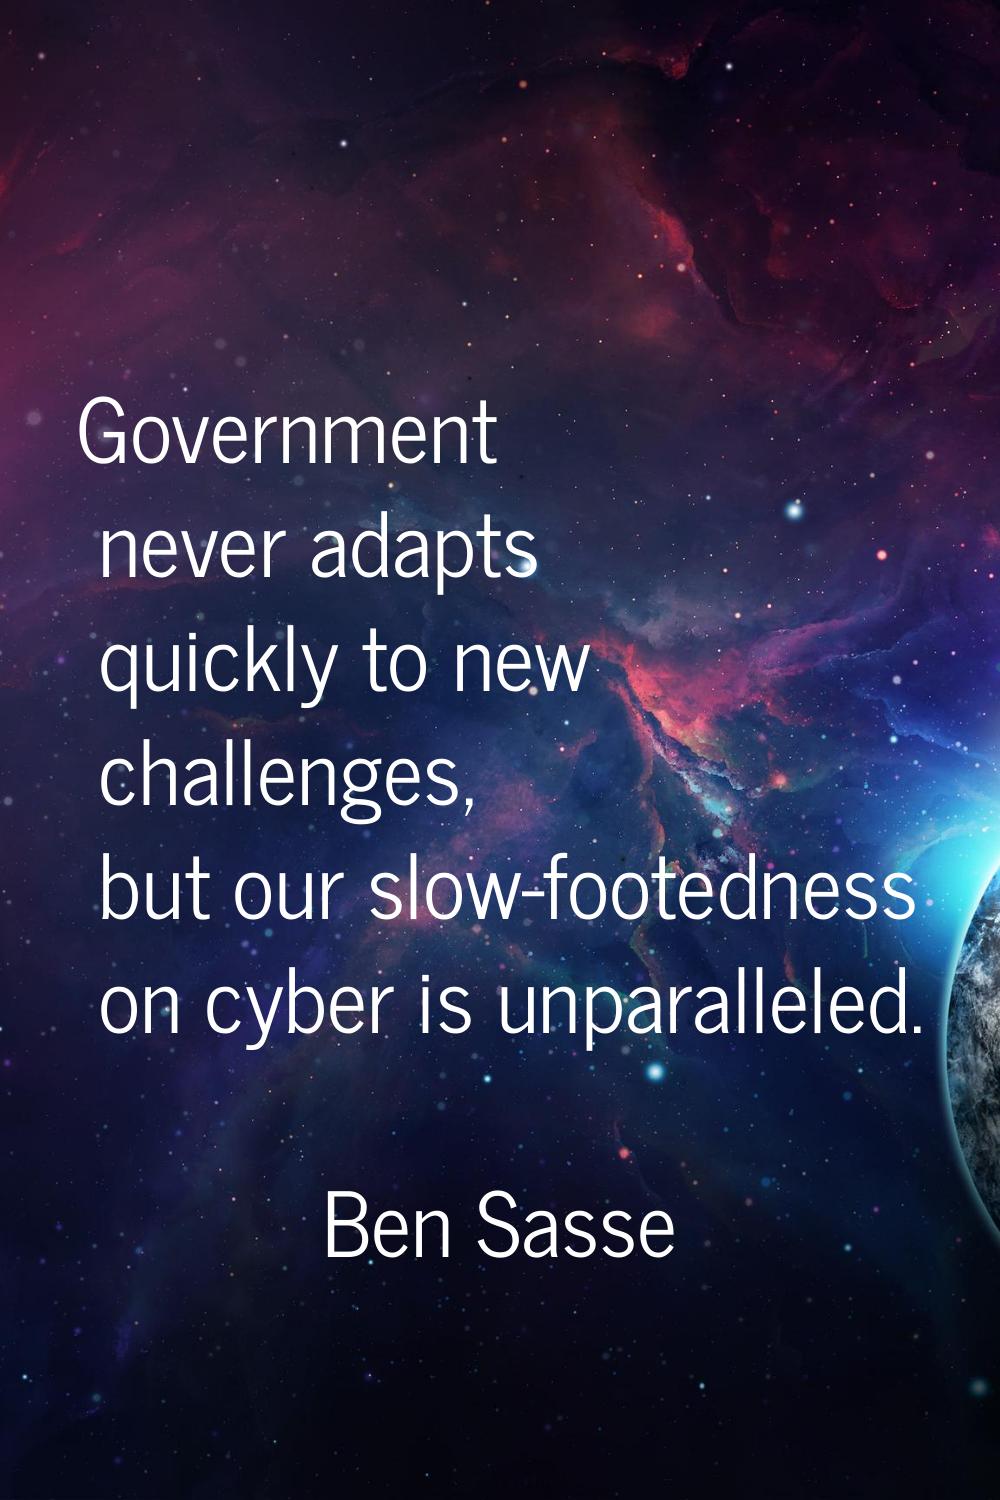 Government never adapts quickly to new challenges, but our slow-footedness on cyber is unparalleled